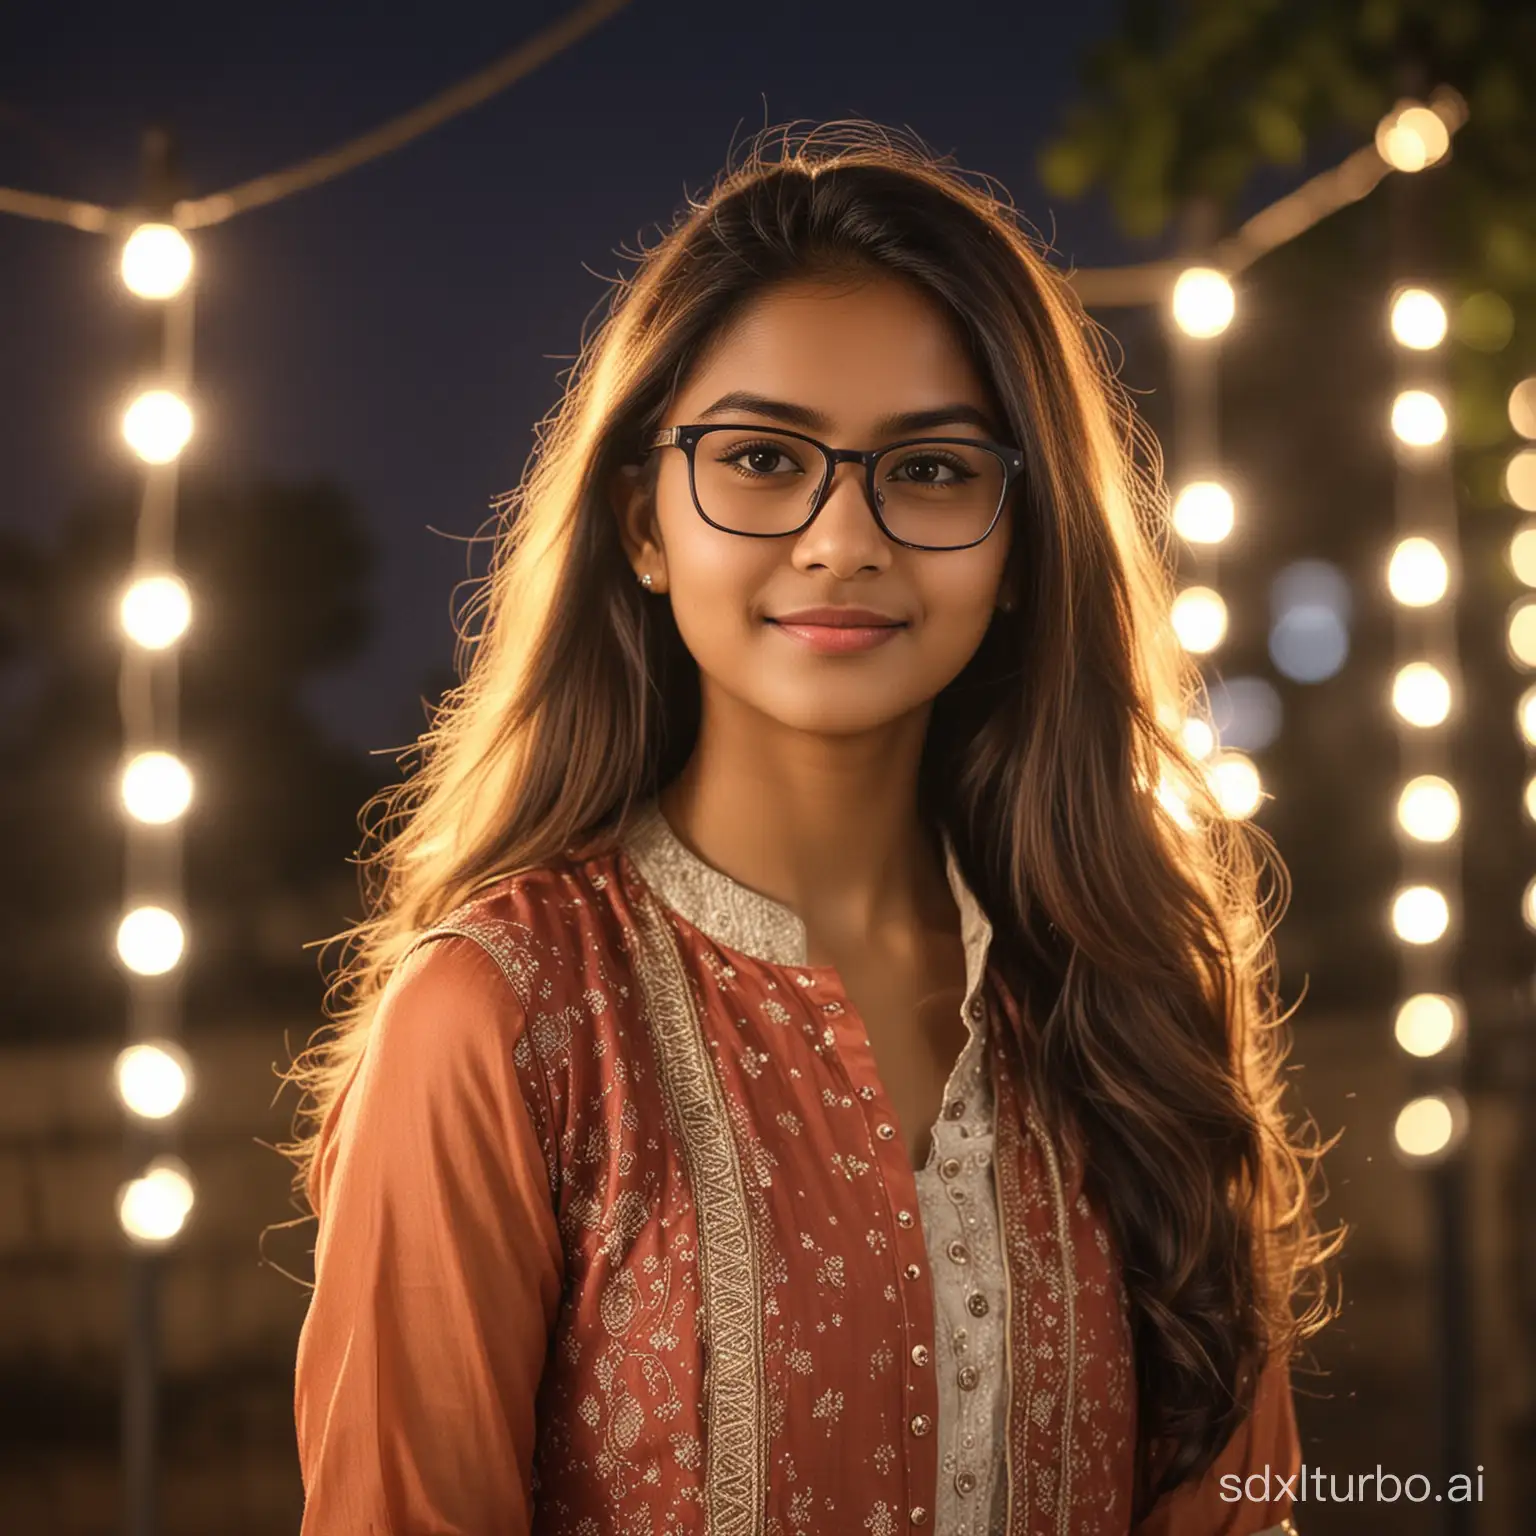 Stylish-16YearOld-Girl-with-Silky-Hair-and-Glasses-in-Vibrant-Urban-Setting